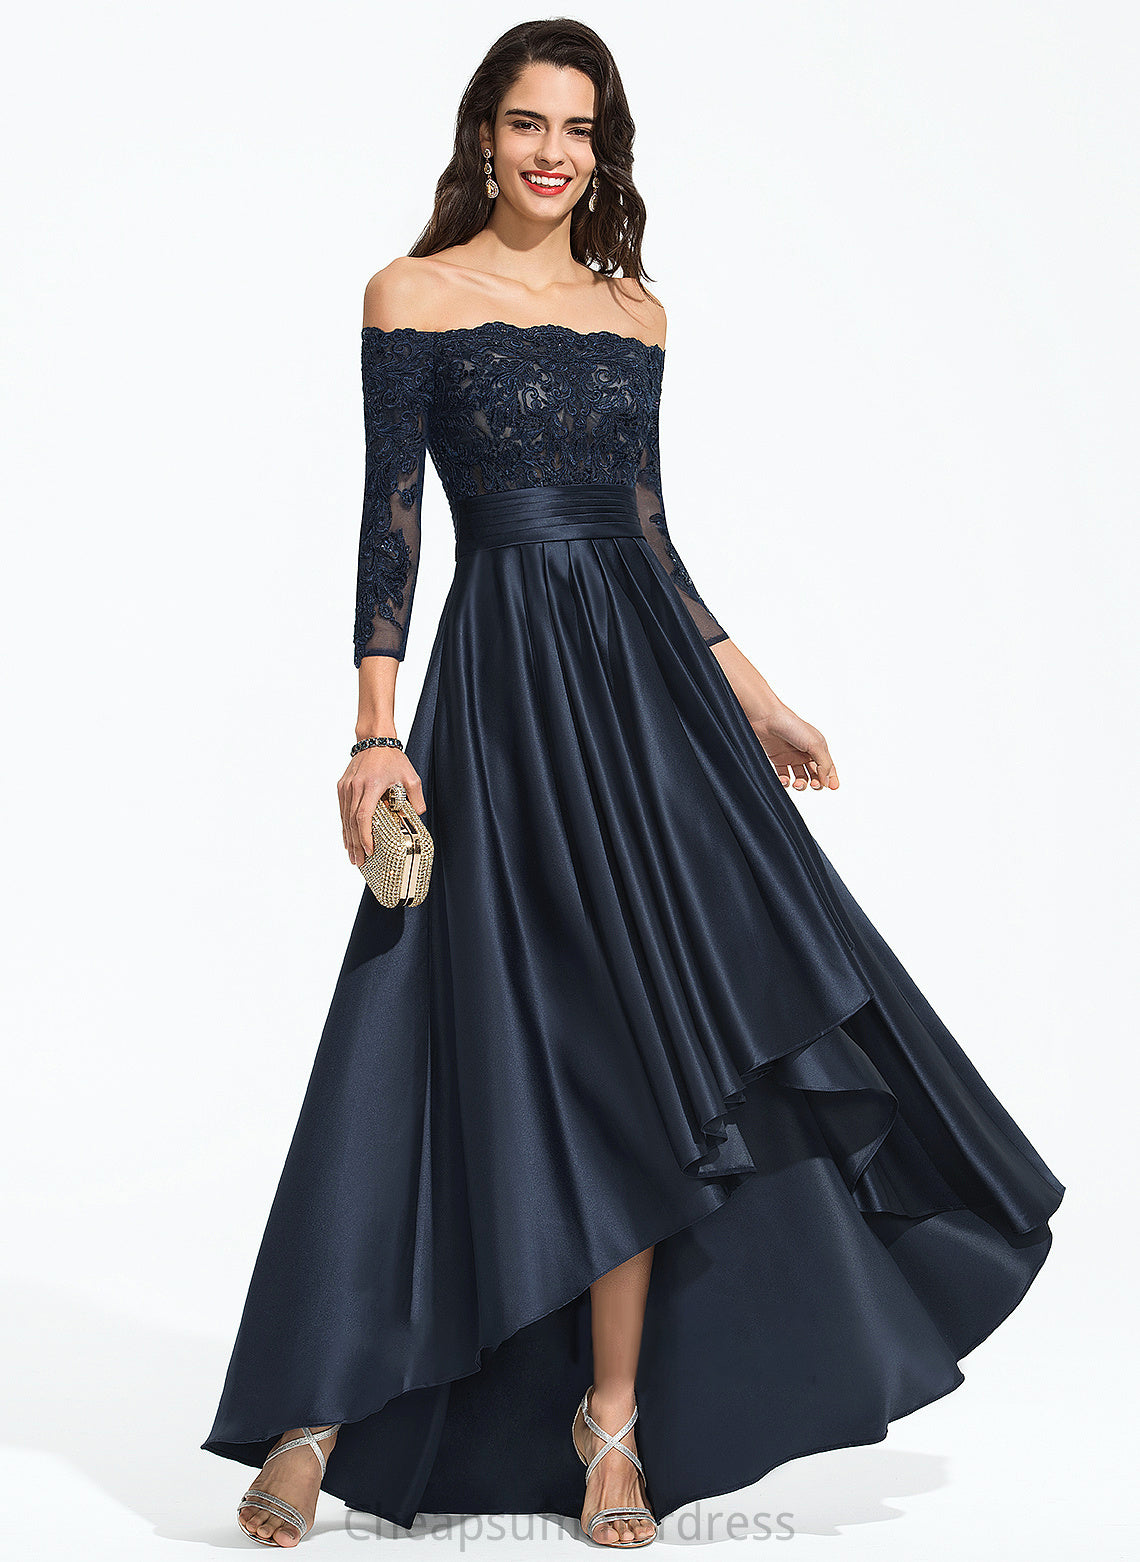 Off-the-Shoulder Prom Dresses Lila Ruffle Satin Sequins Asymmetrical A-Line With